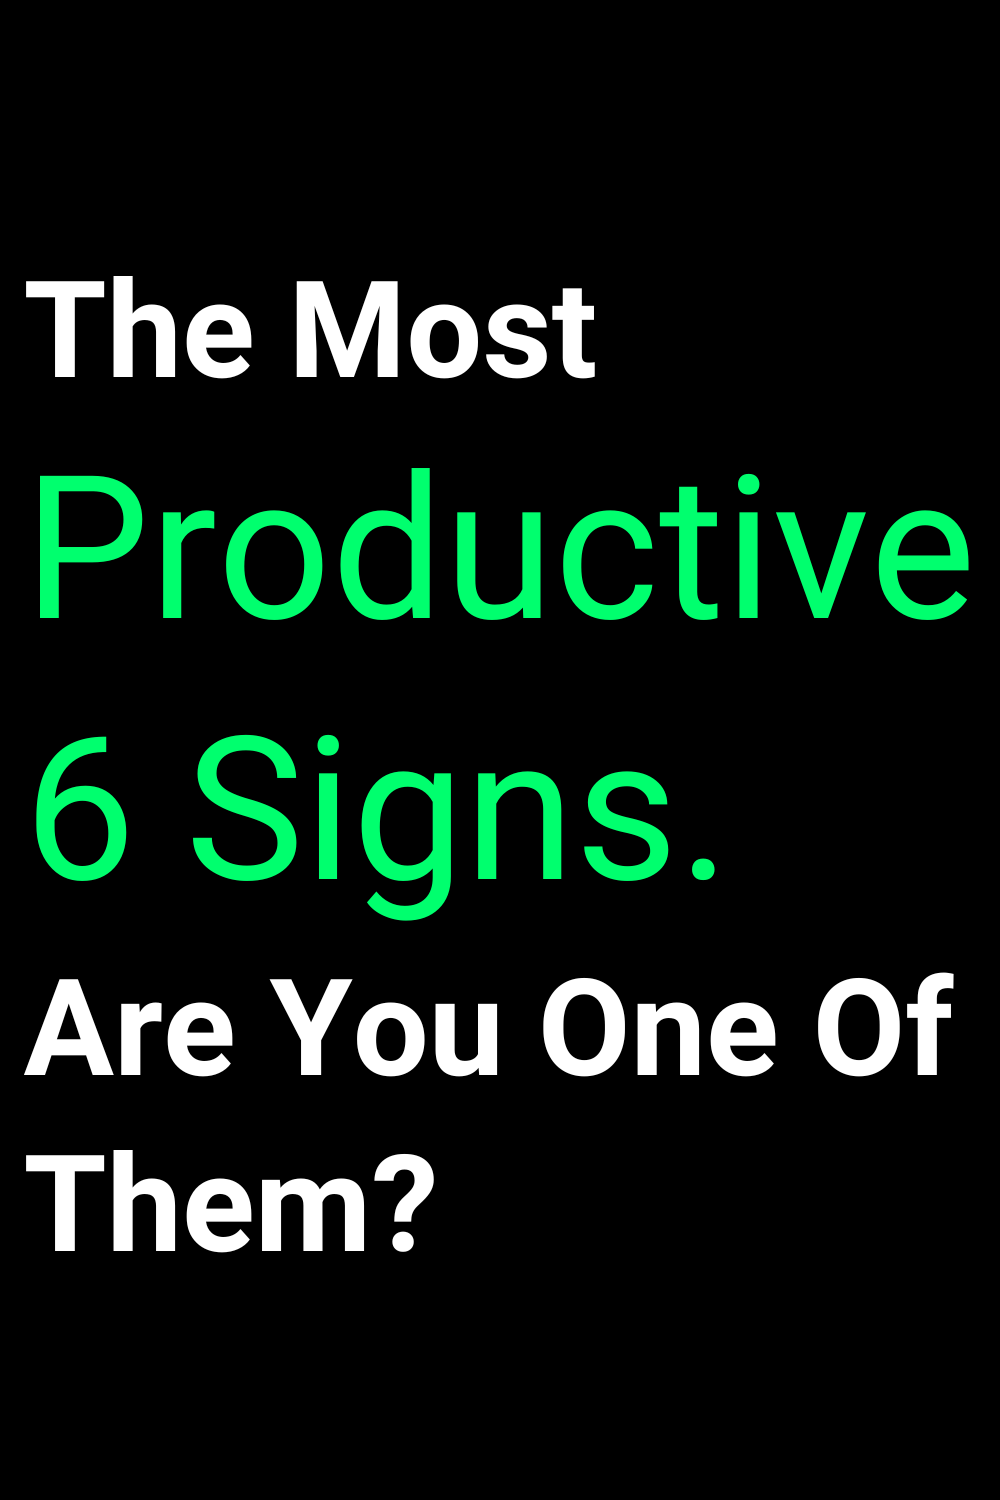 The Most Productive 6 Signs. Are You One Of Them?